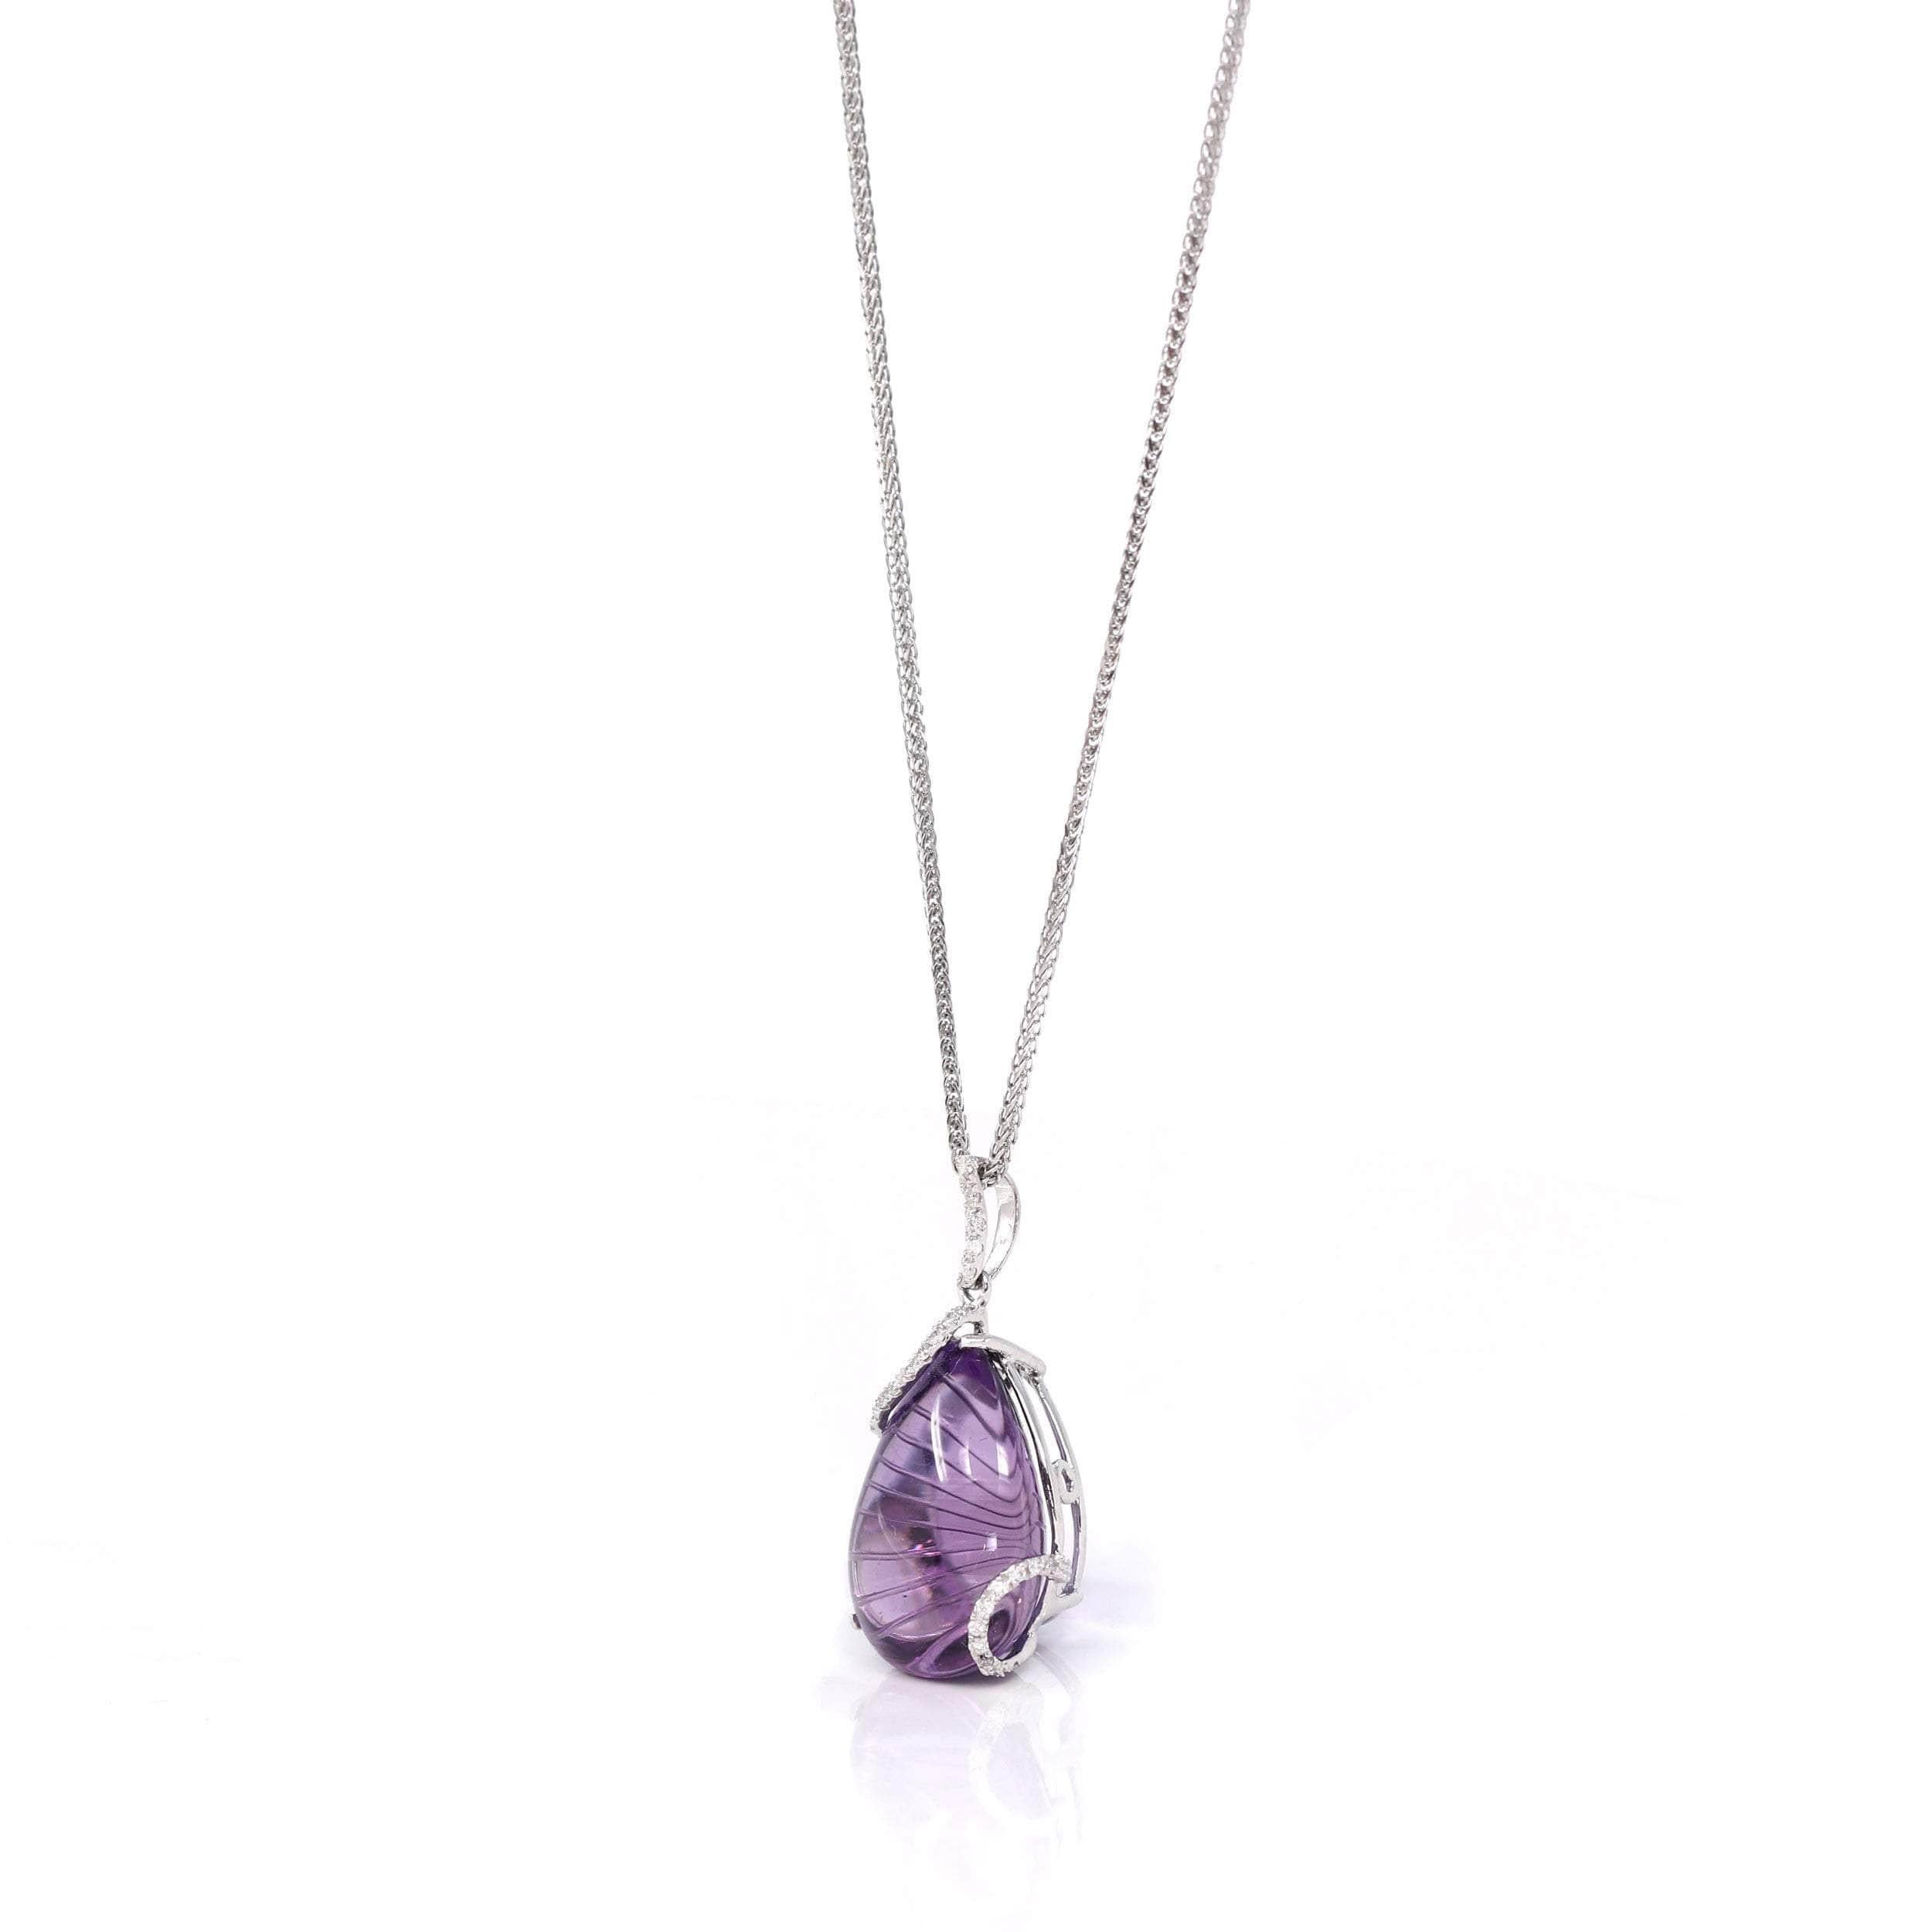 * INTRODUCTION--- This pendant is made with high-quality genuine 5.84ct AAA nice purple amethyst & SI genuine diamonds. It looks so royal and exquisite. The luxury purple color stands out like no other. And the whole amethyst is so vibrant. The